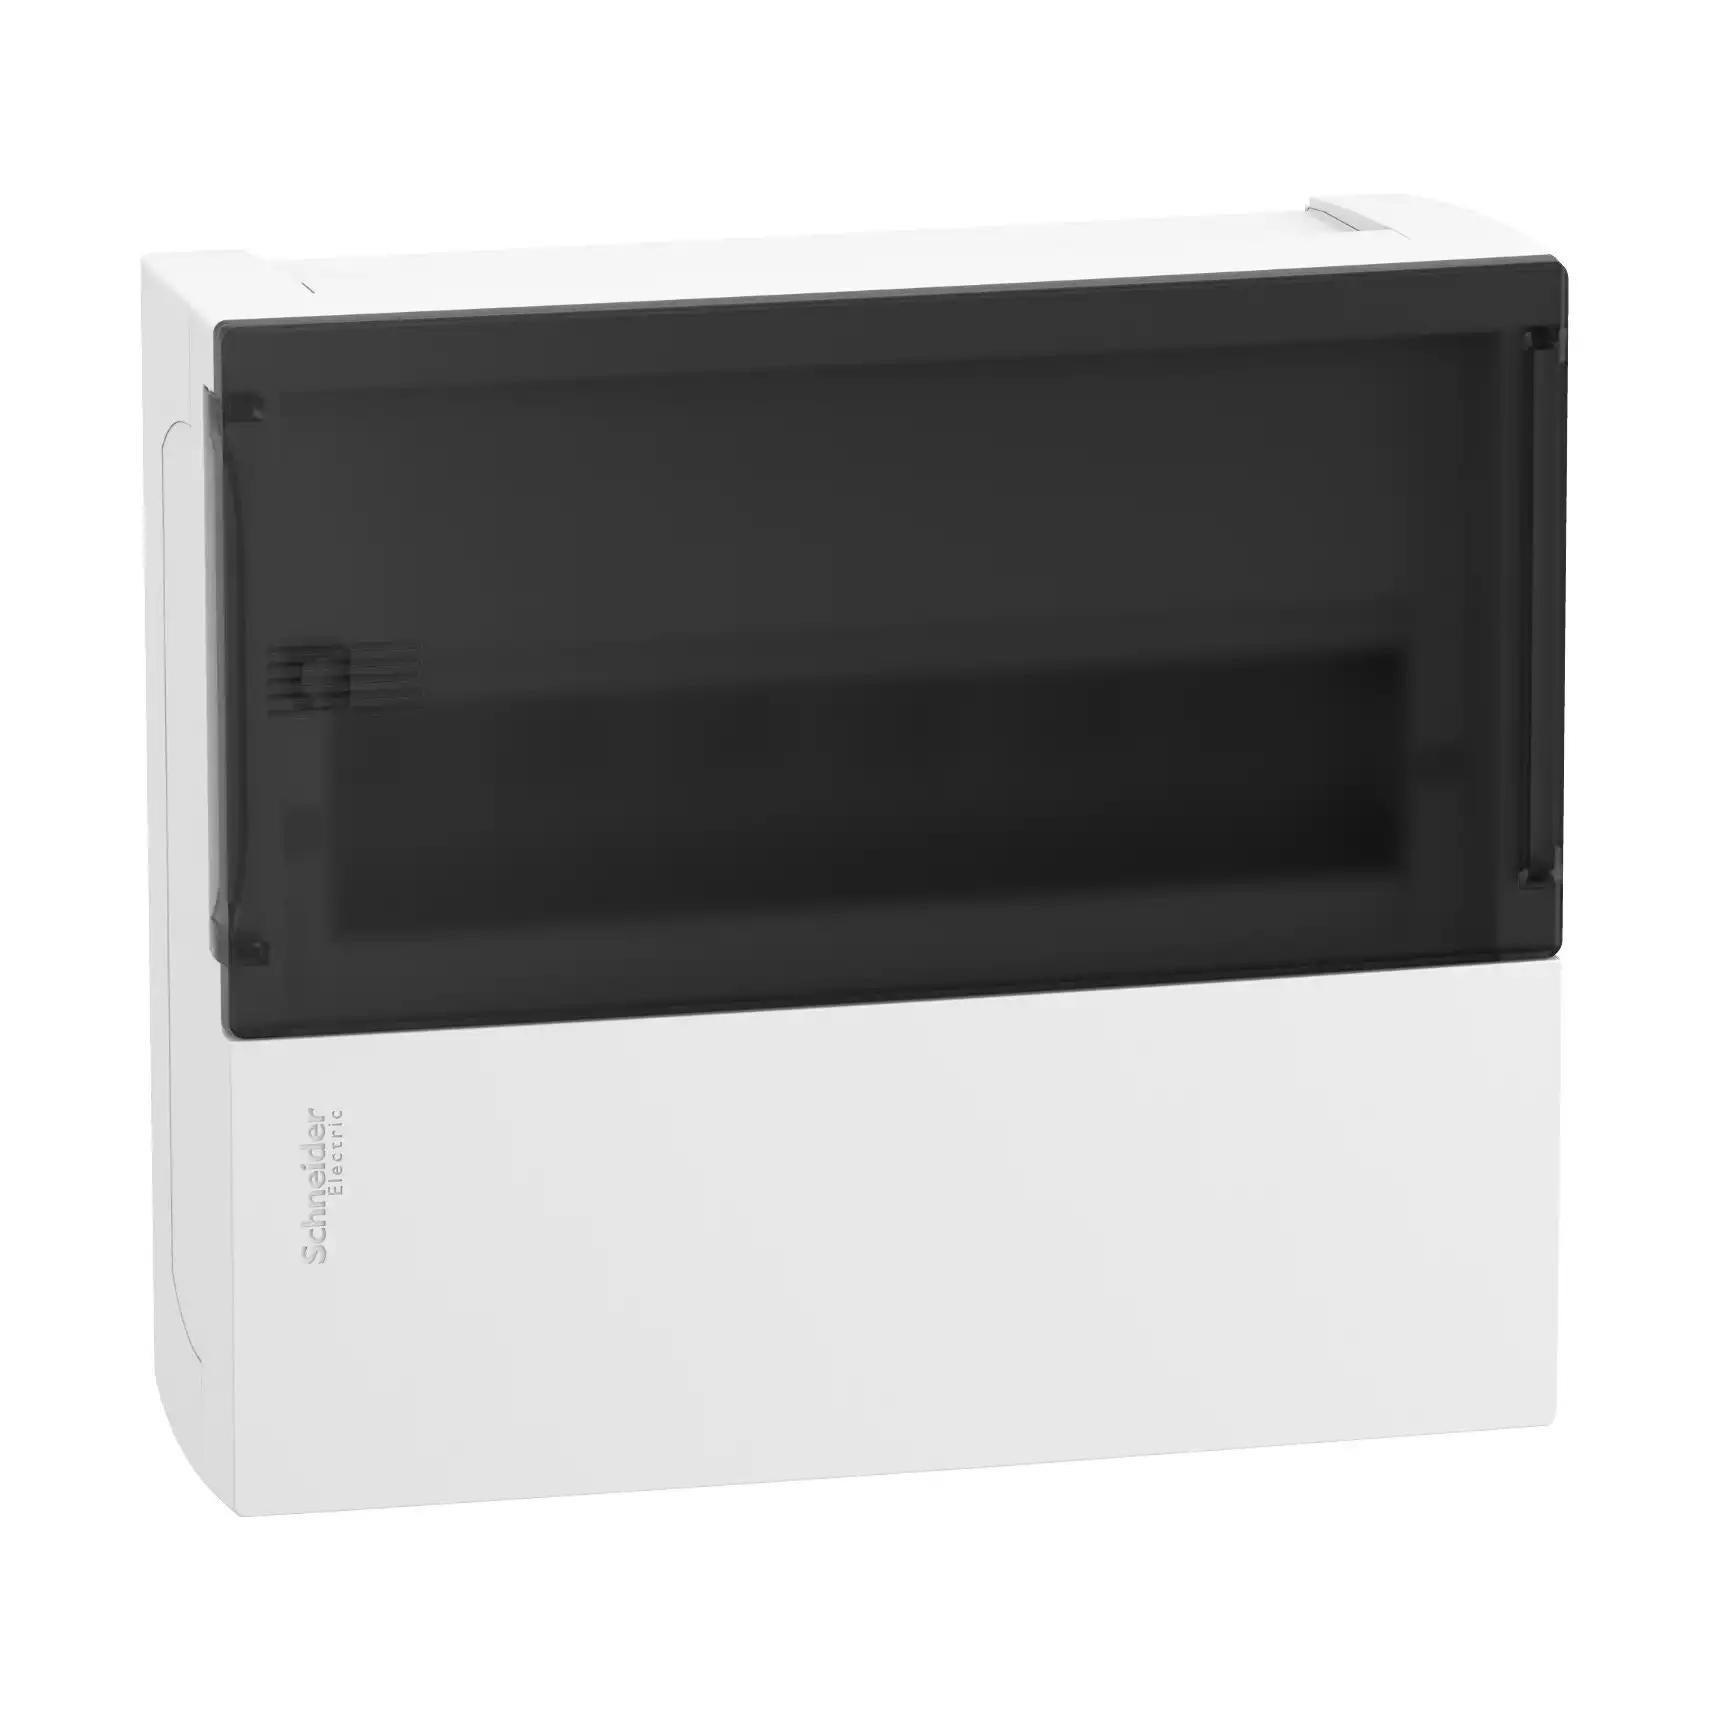 Enclosure, Resi9 MP, surface mounting, 1 row of 12 modules, IP40, smoked door, 1 earth + 1 neutral terminal blocks